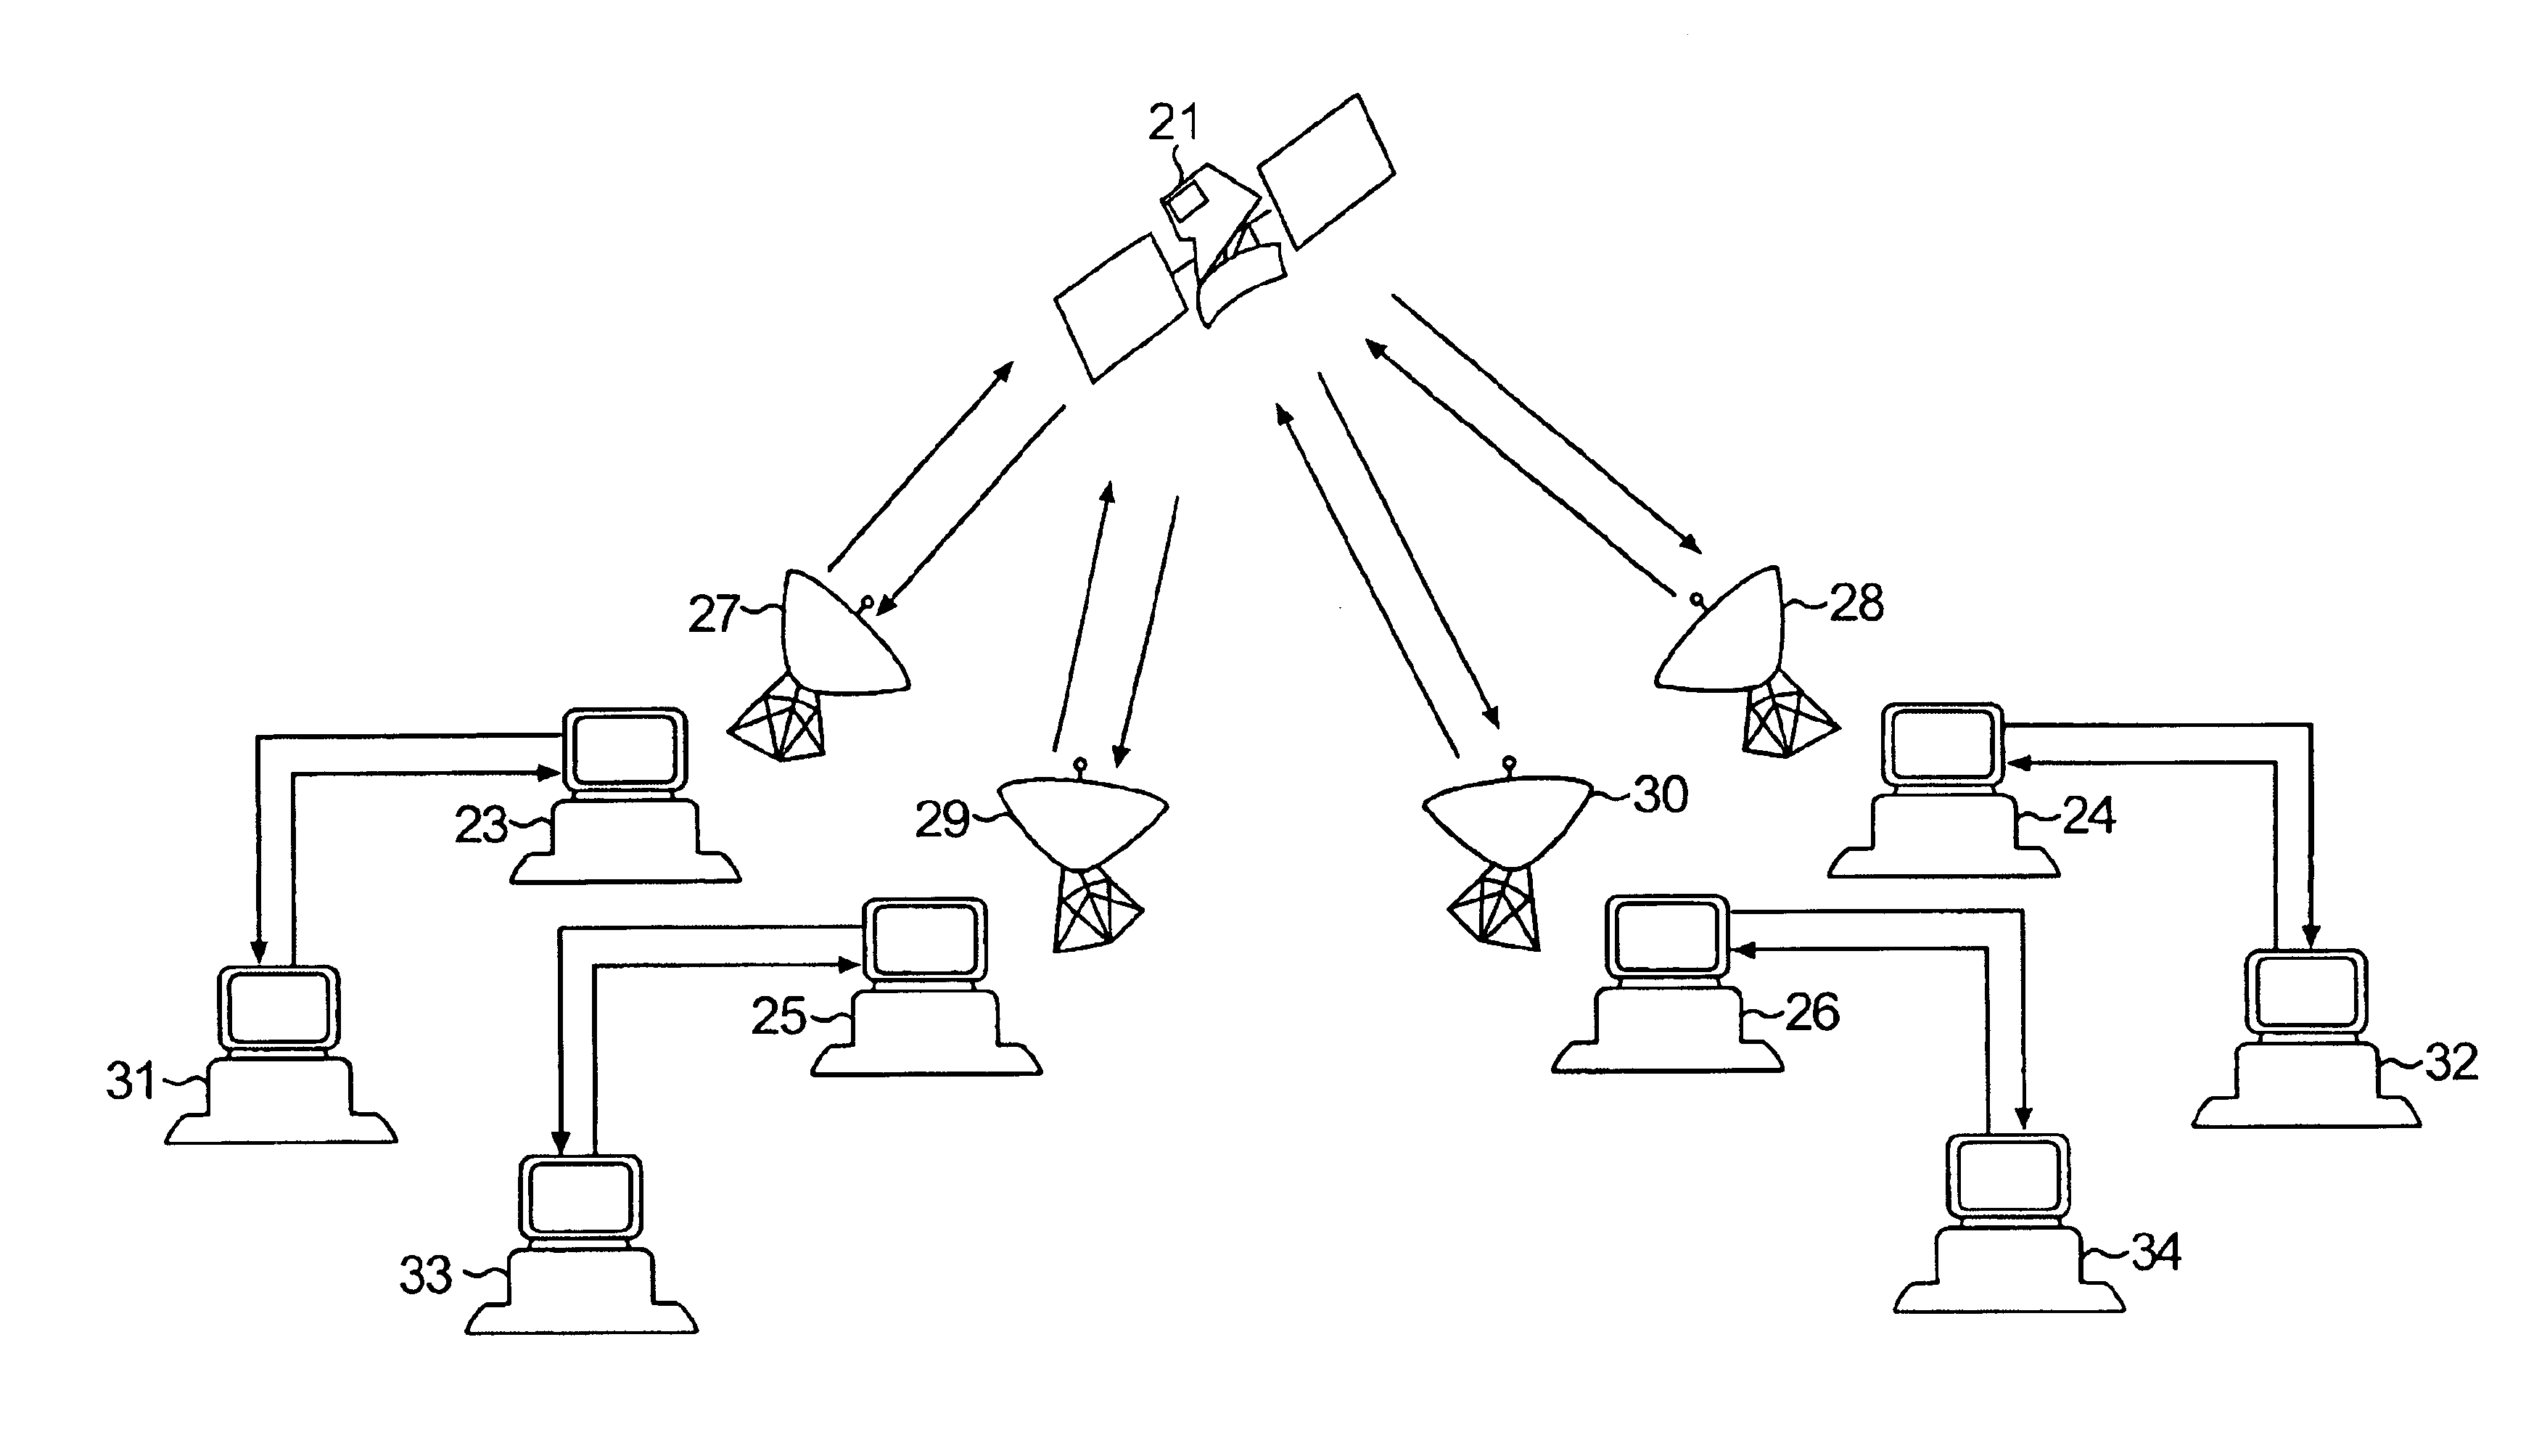 Distributed determination of explicit rate in an ATM communication system